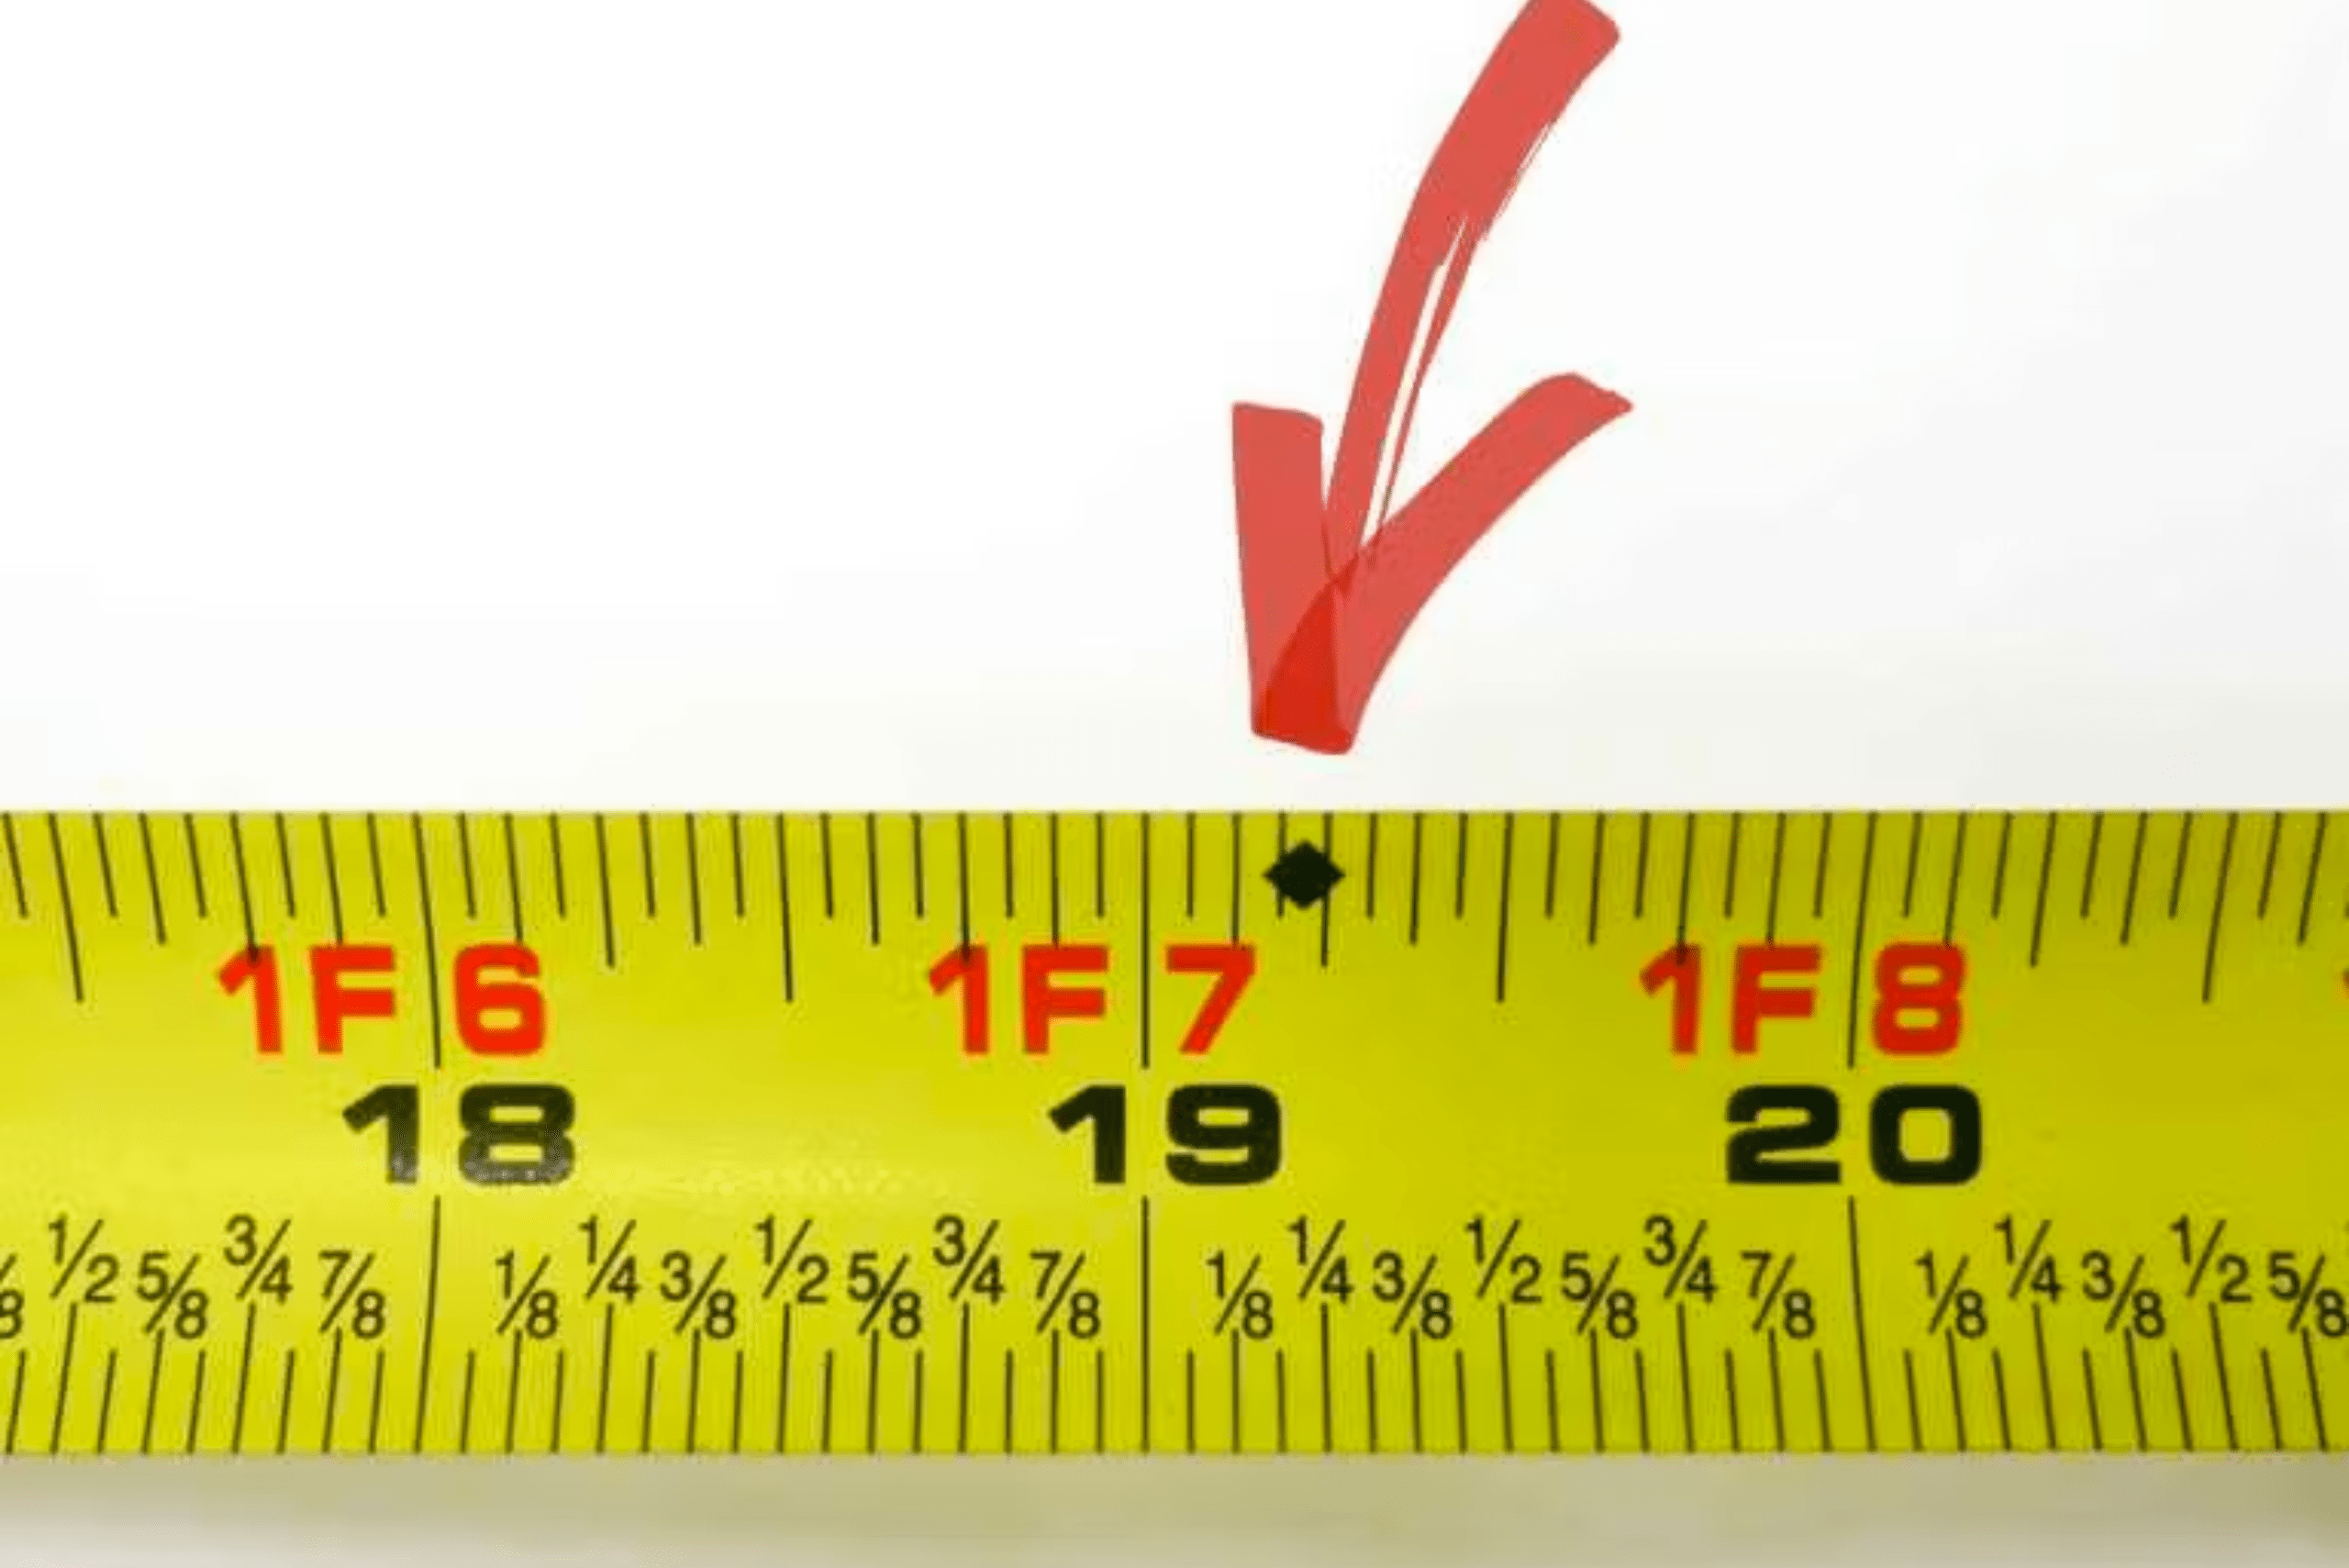 A measuring tape with a black diamond marking.